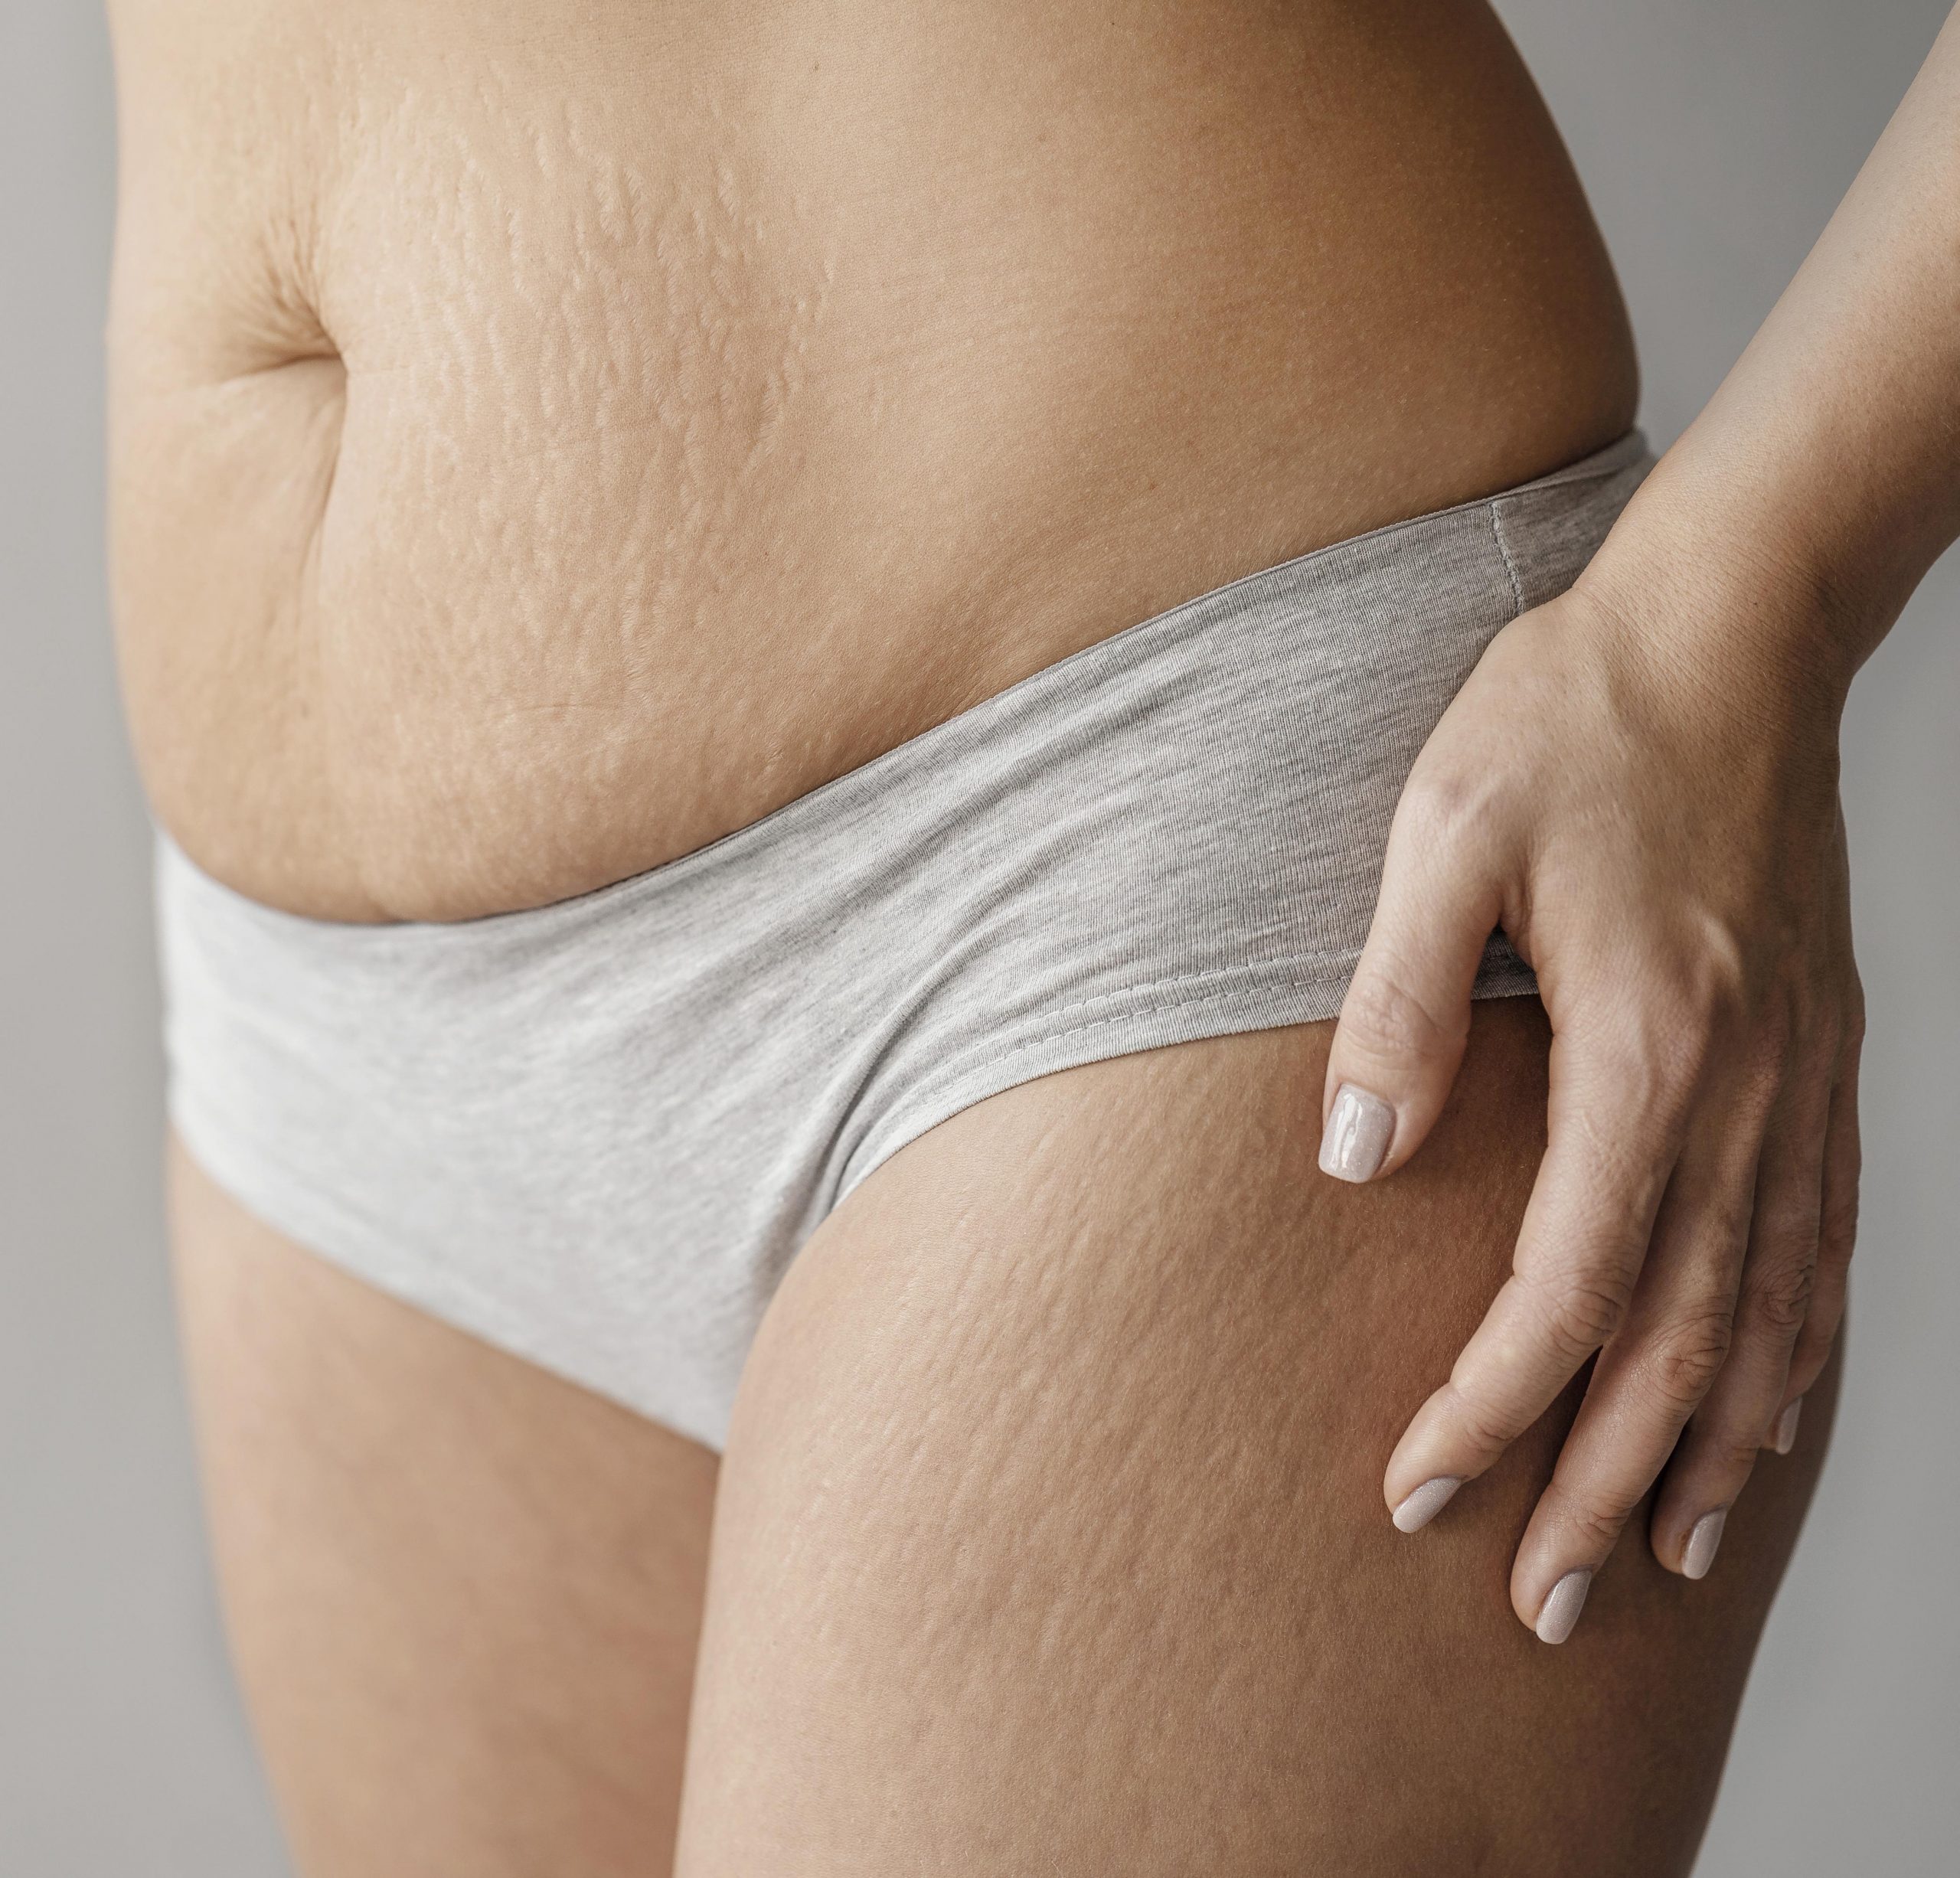 How to get rid of cellulite